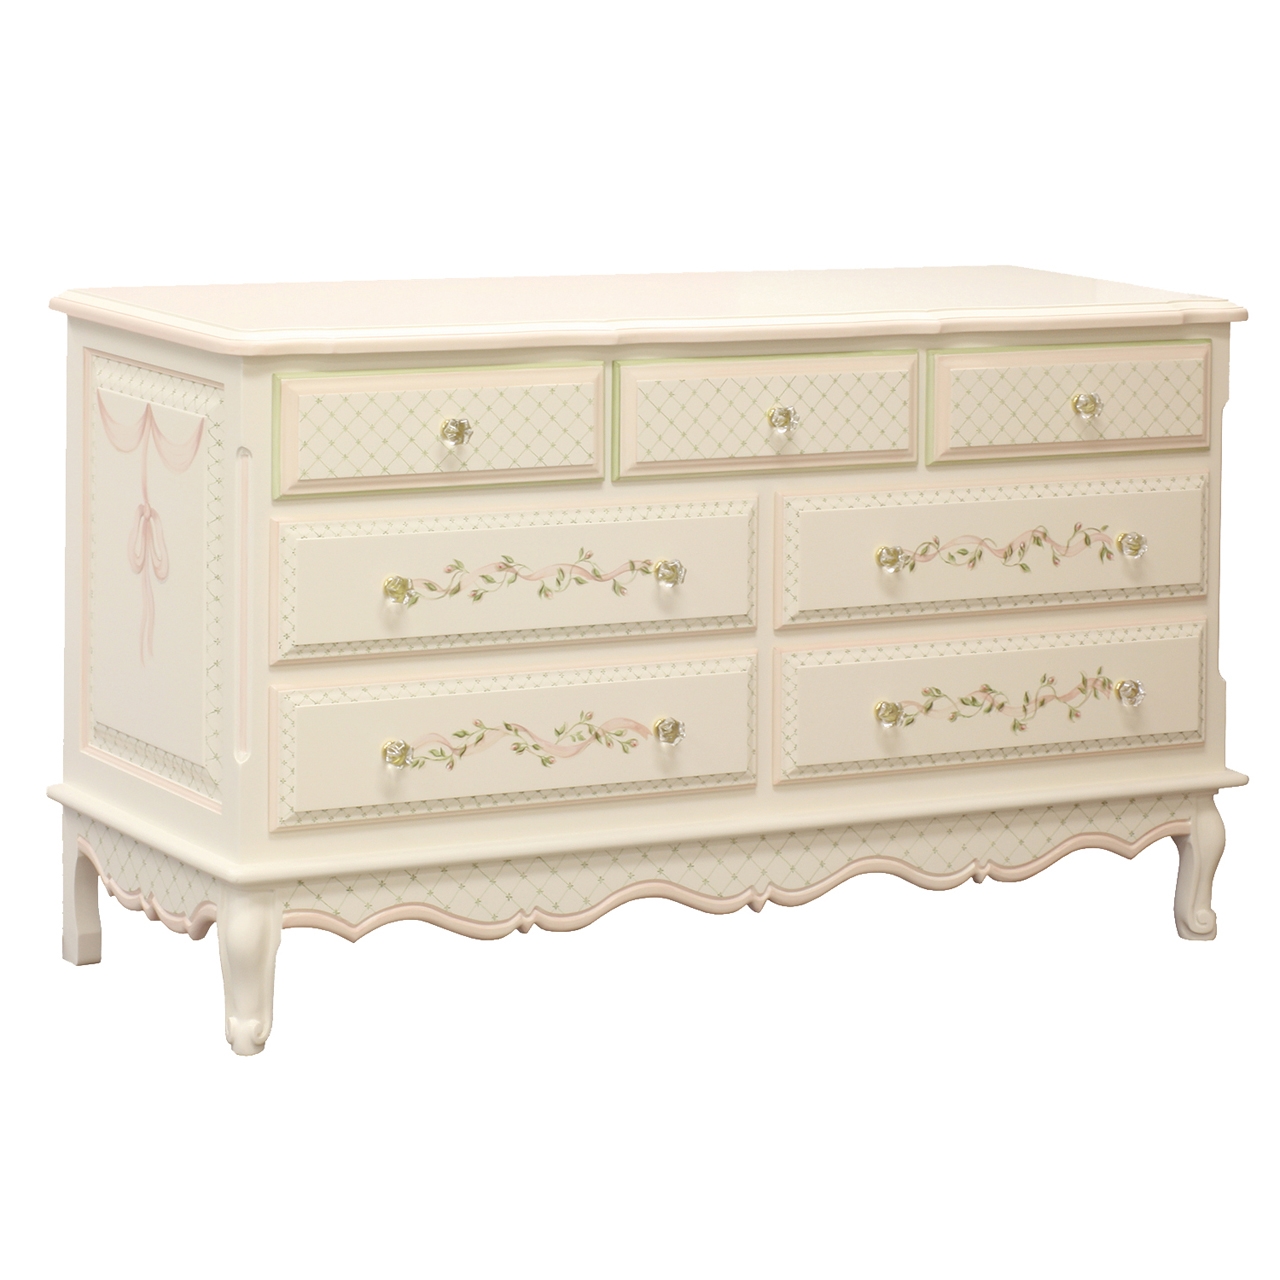 French Dresser In Ribbons Roses By Afk Art For Kids